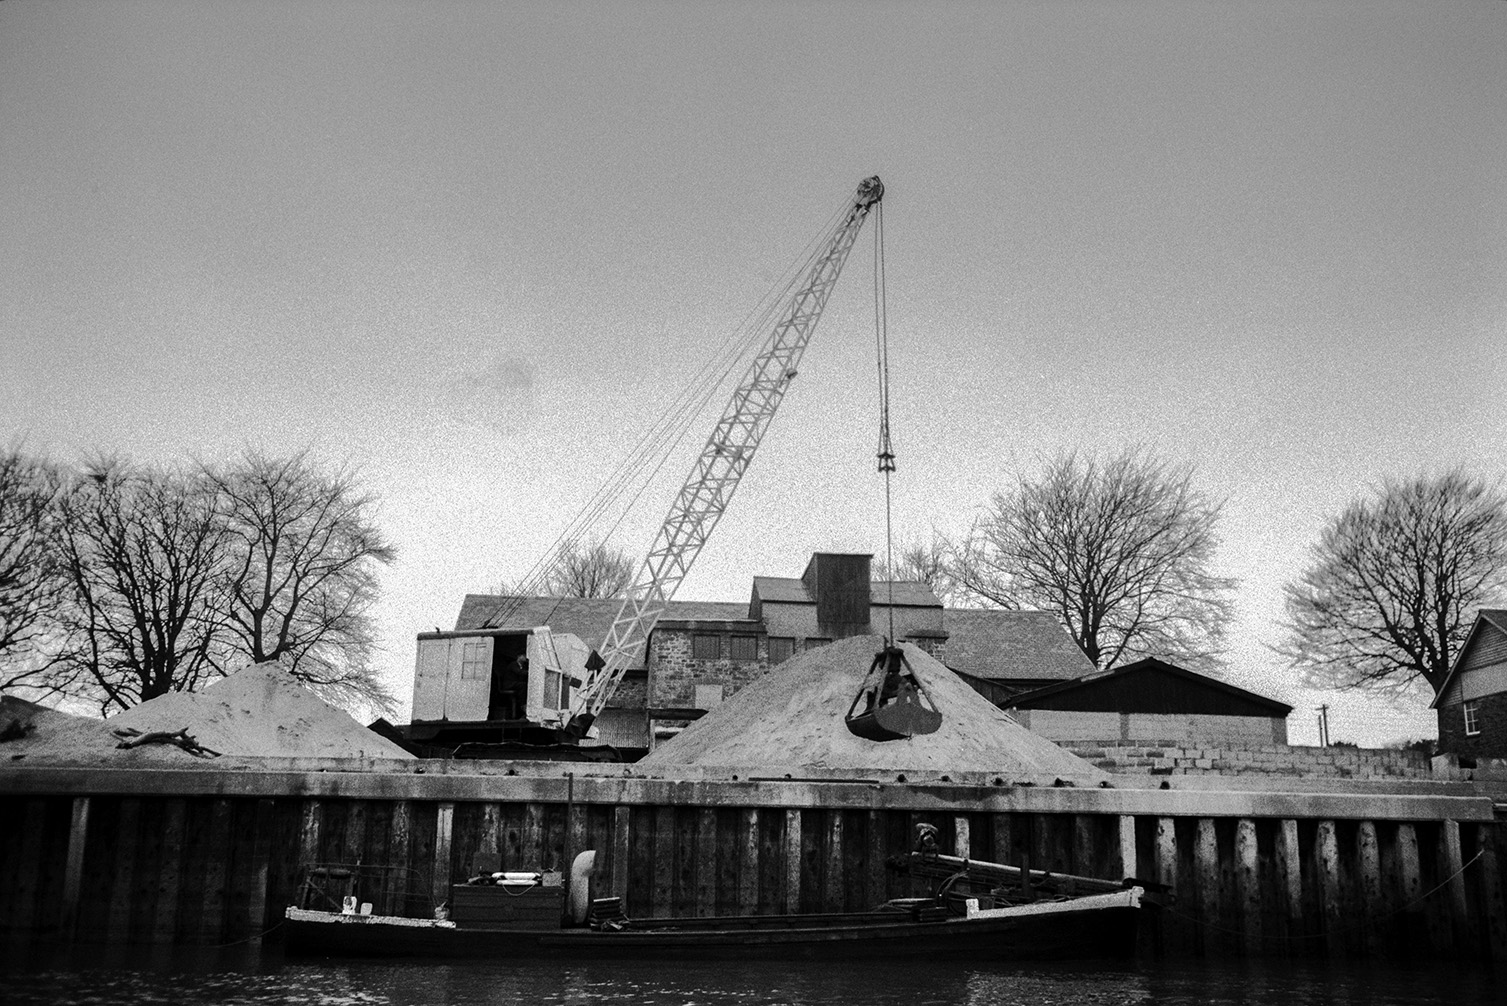 A crane with a mechanical grab unloading sand from a barge onto a dockside, possibly on the Taw River estuary.